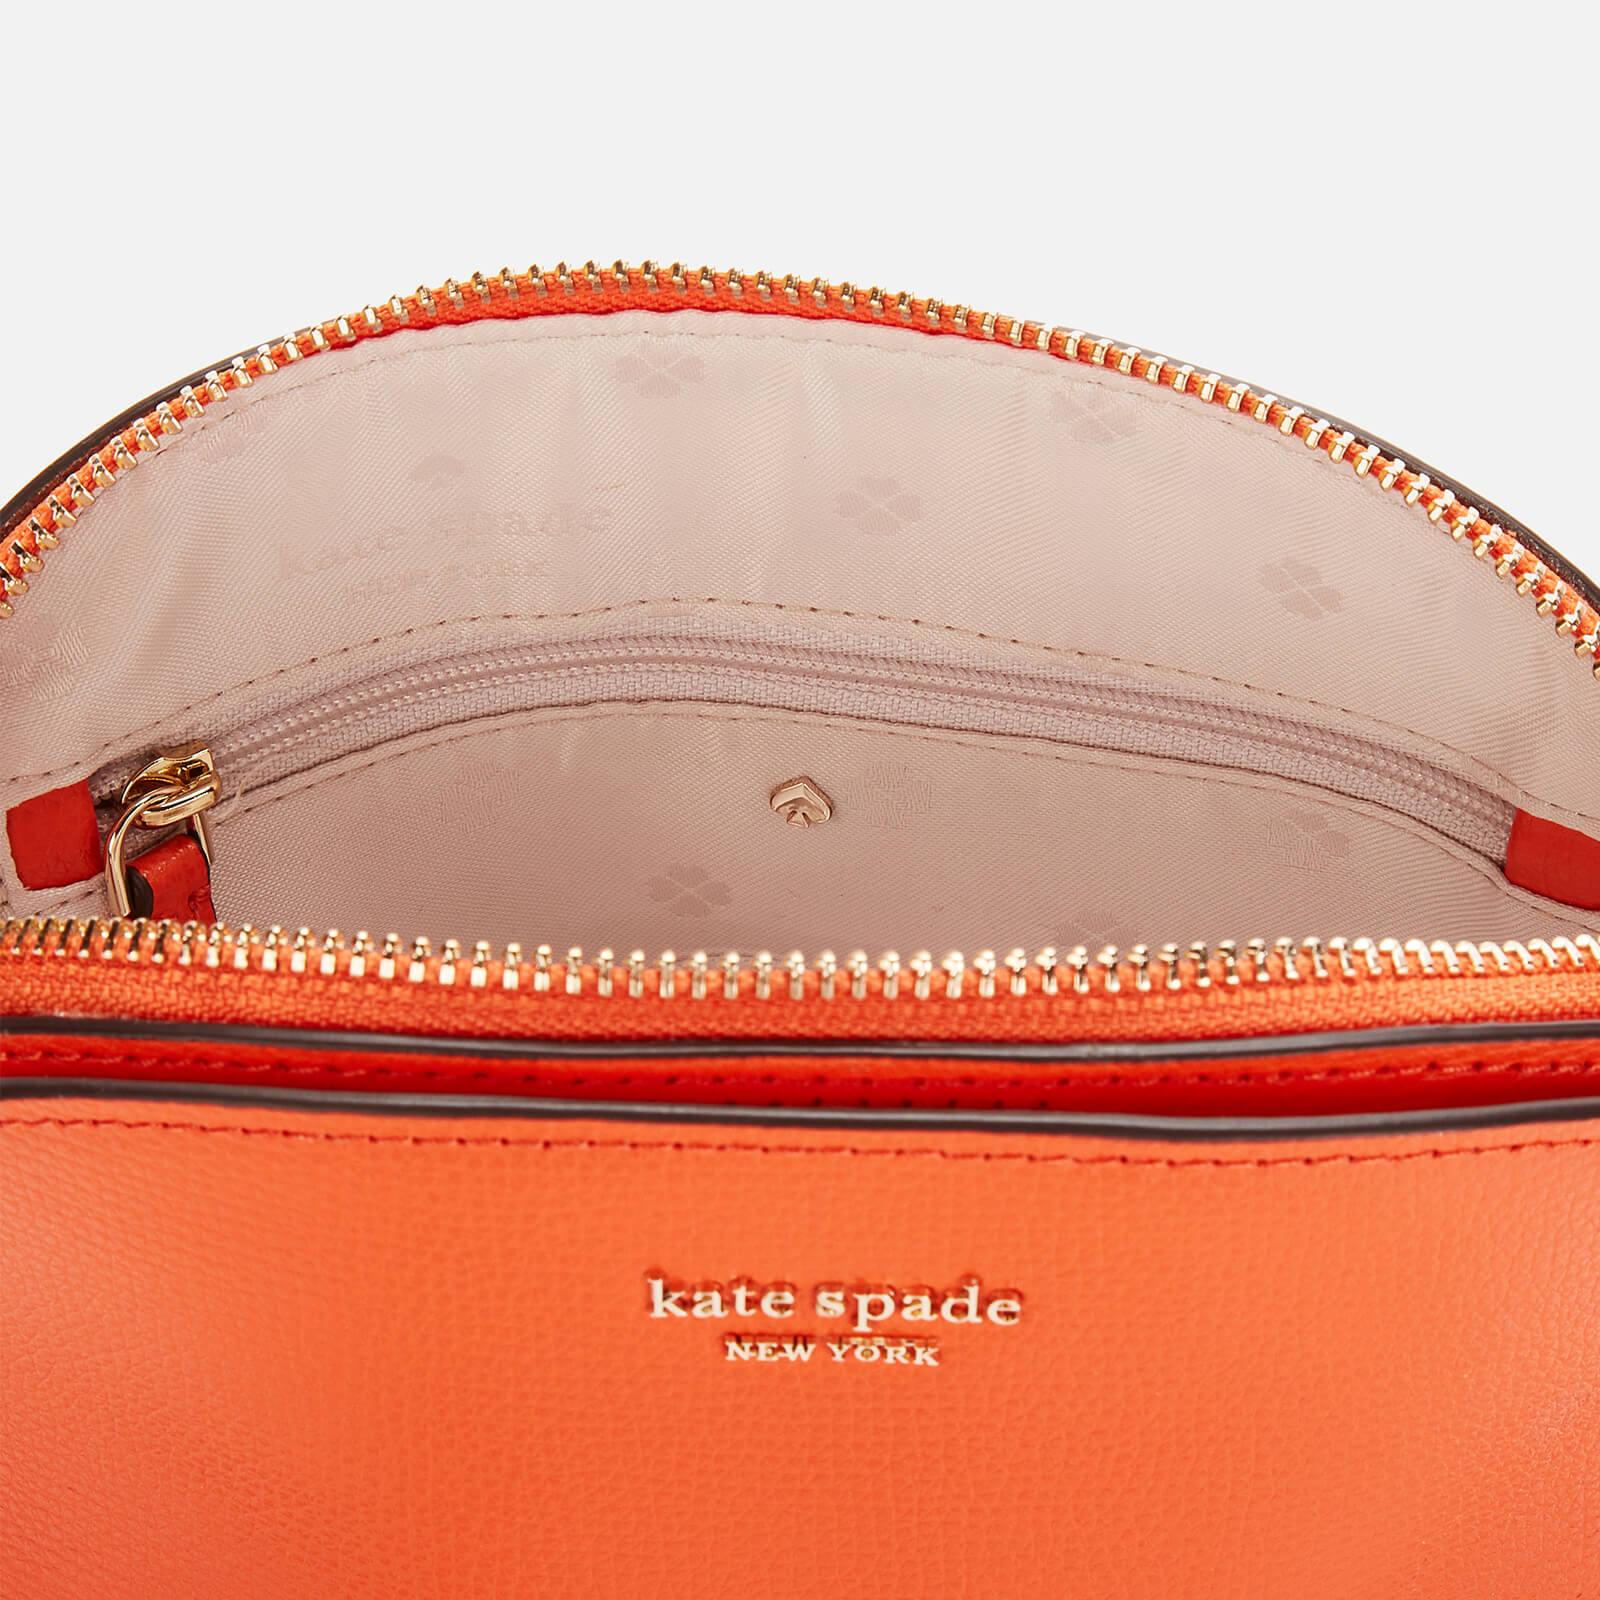 Kate Spade Sylvia Mini Dome Leather Satchel in Red